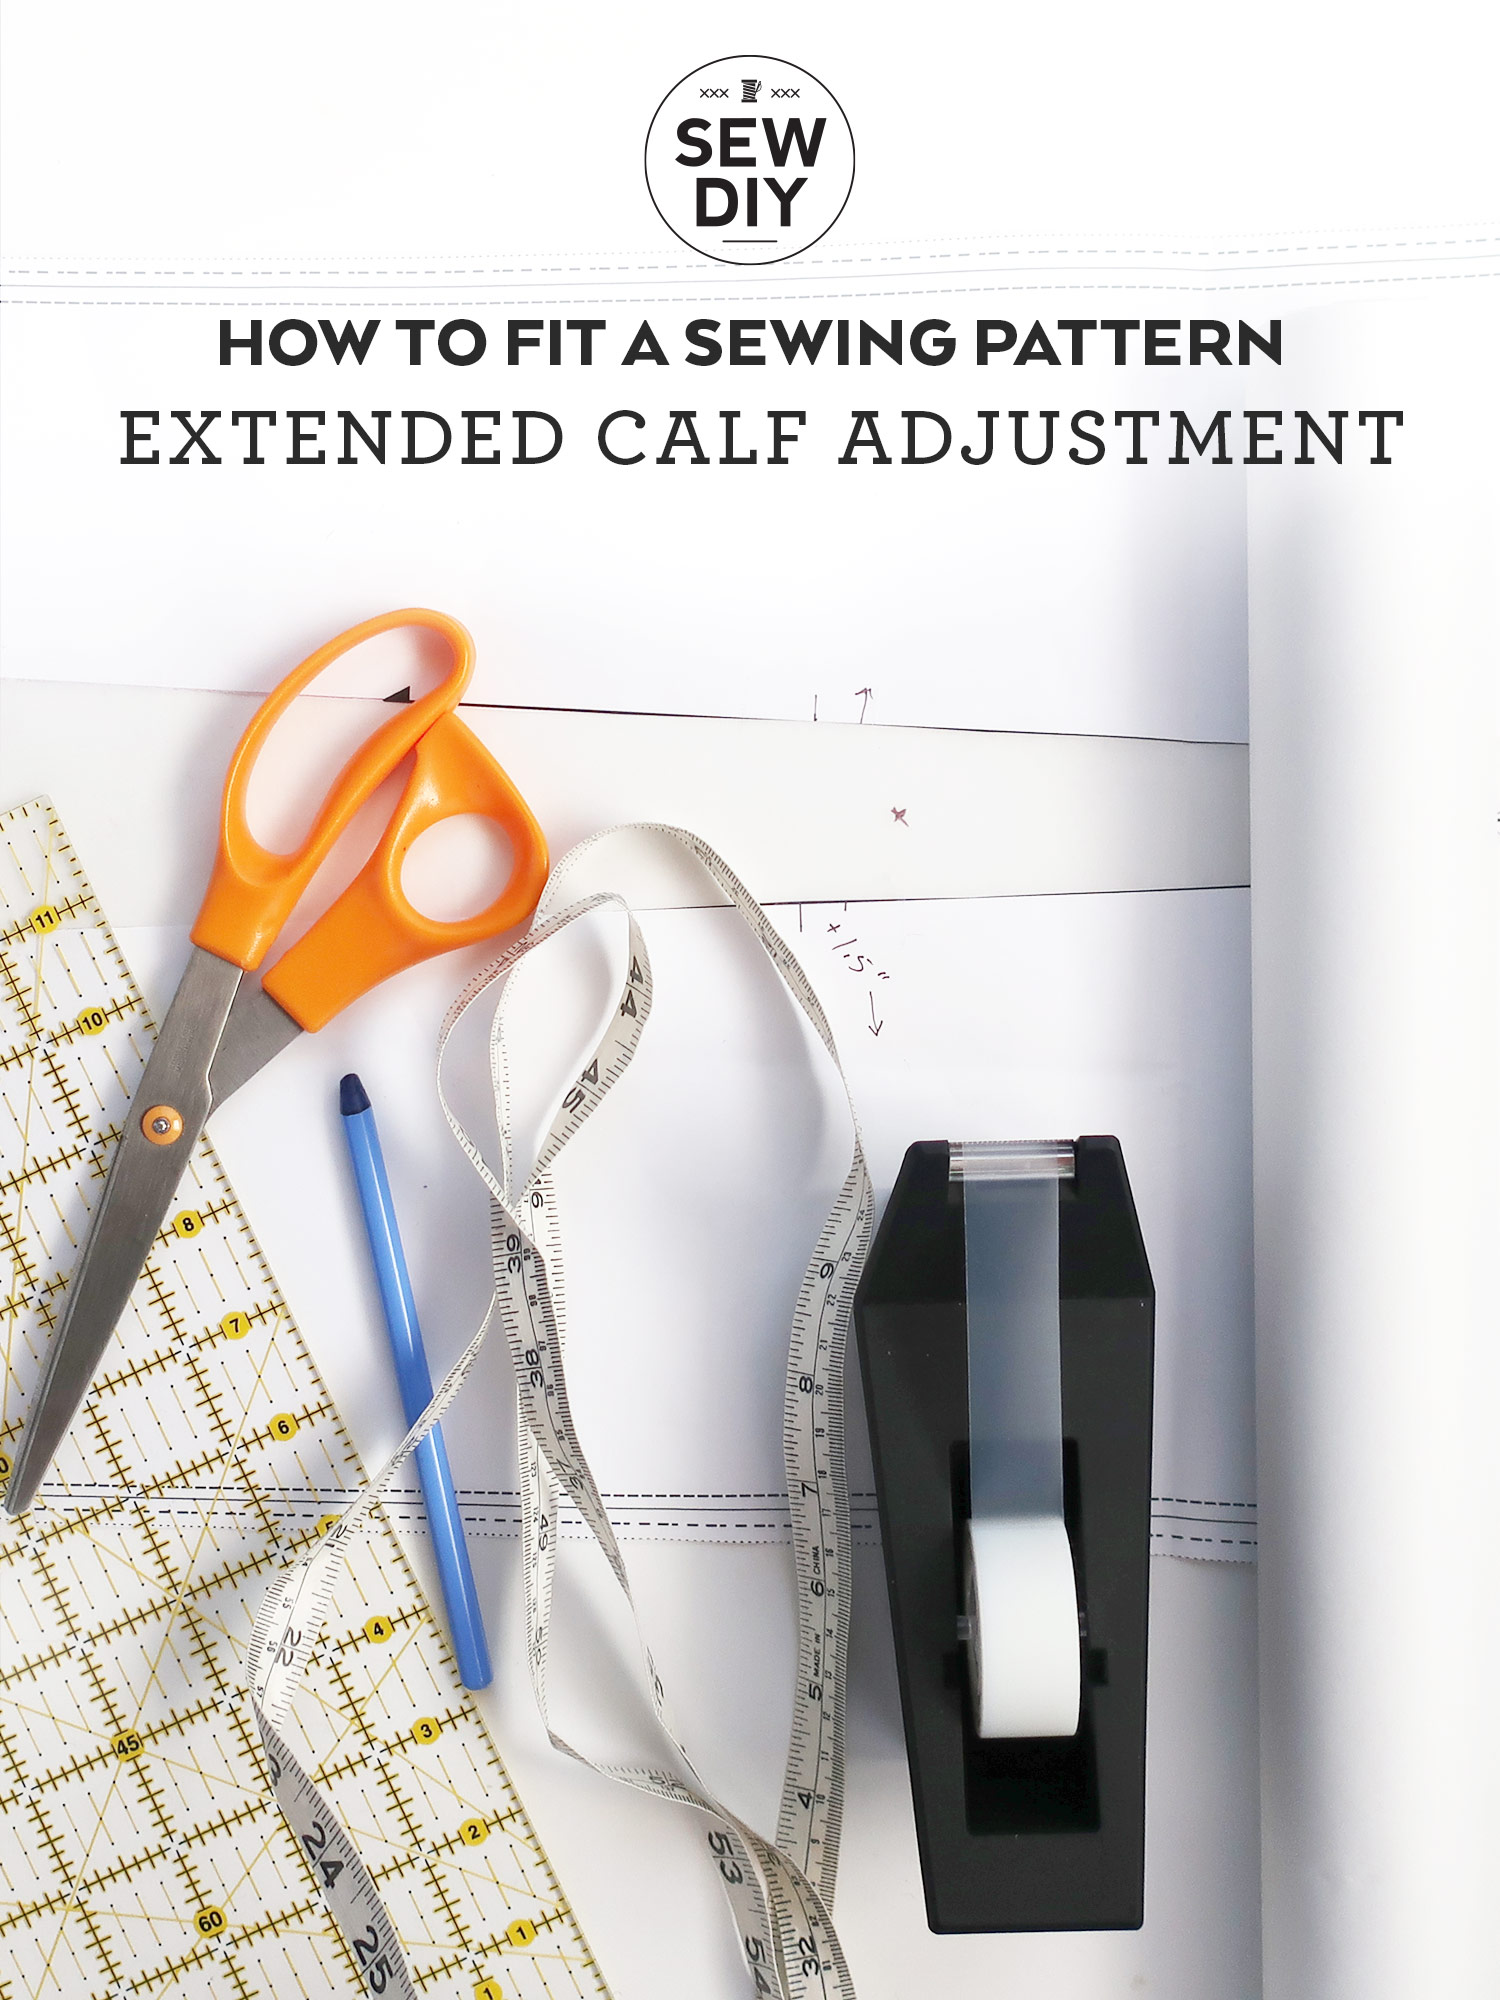 How to Make an Extended Calf Adjustment – Fitting a Sewing Pattern